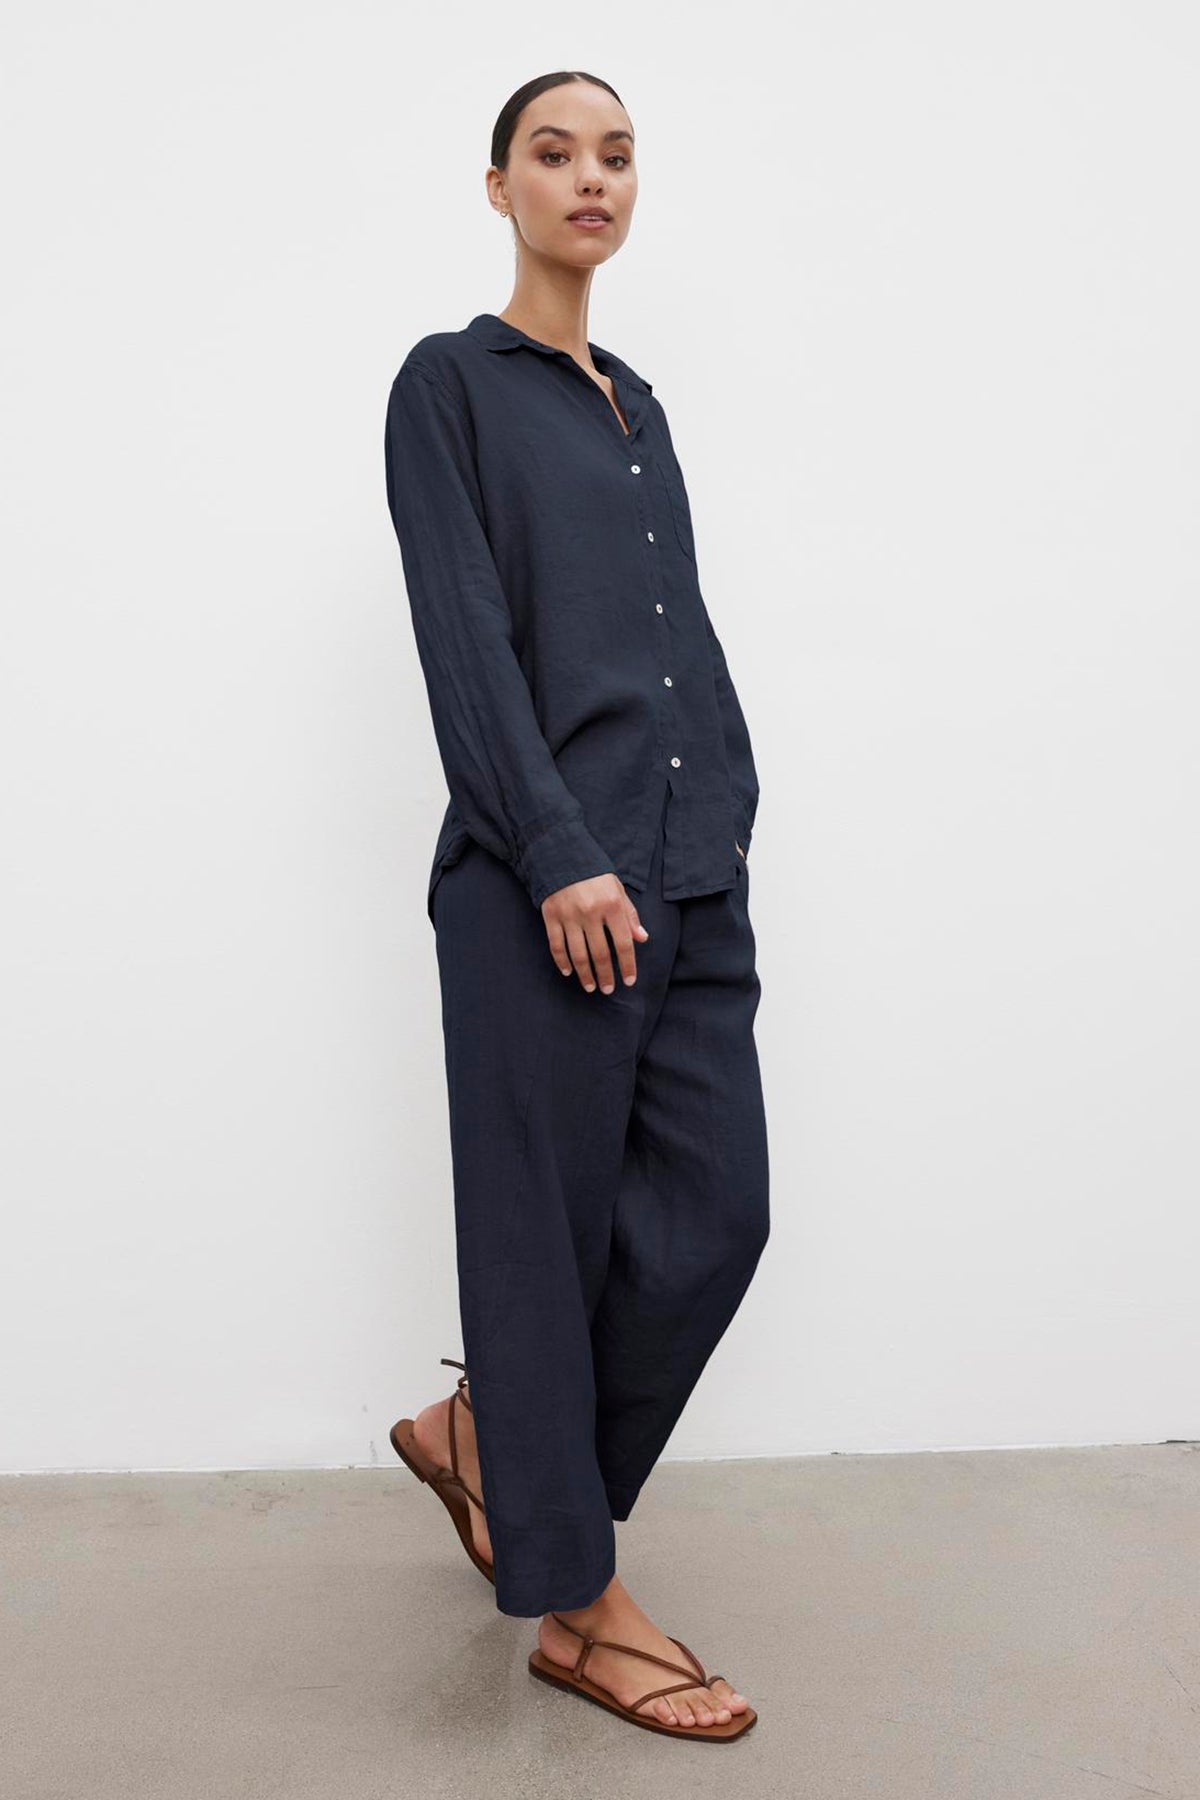 A person standing against a white background, wearing a dark blue MULHOLLAND LINEN SHIRT by Velvet by Jenny Graham with a relaxed silhouette, matching pants, and brown sandals.-36592968466625